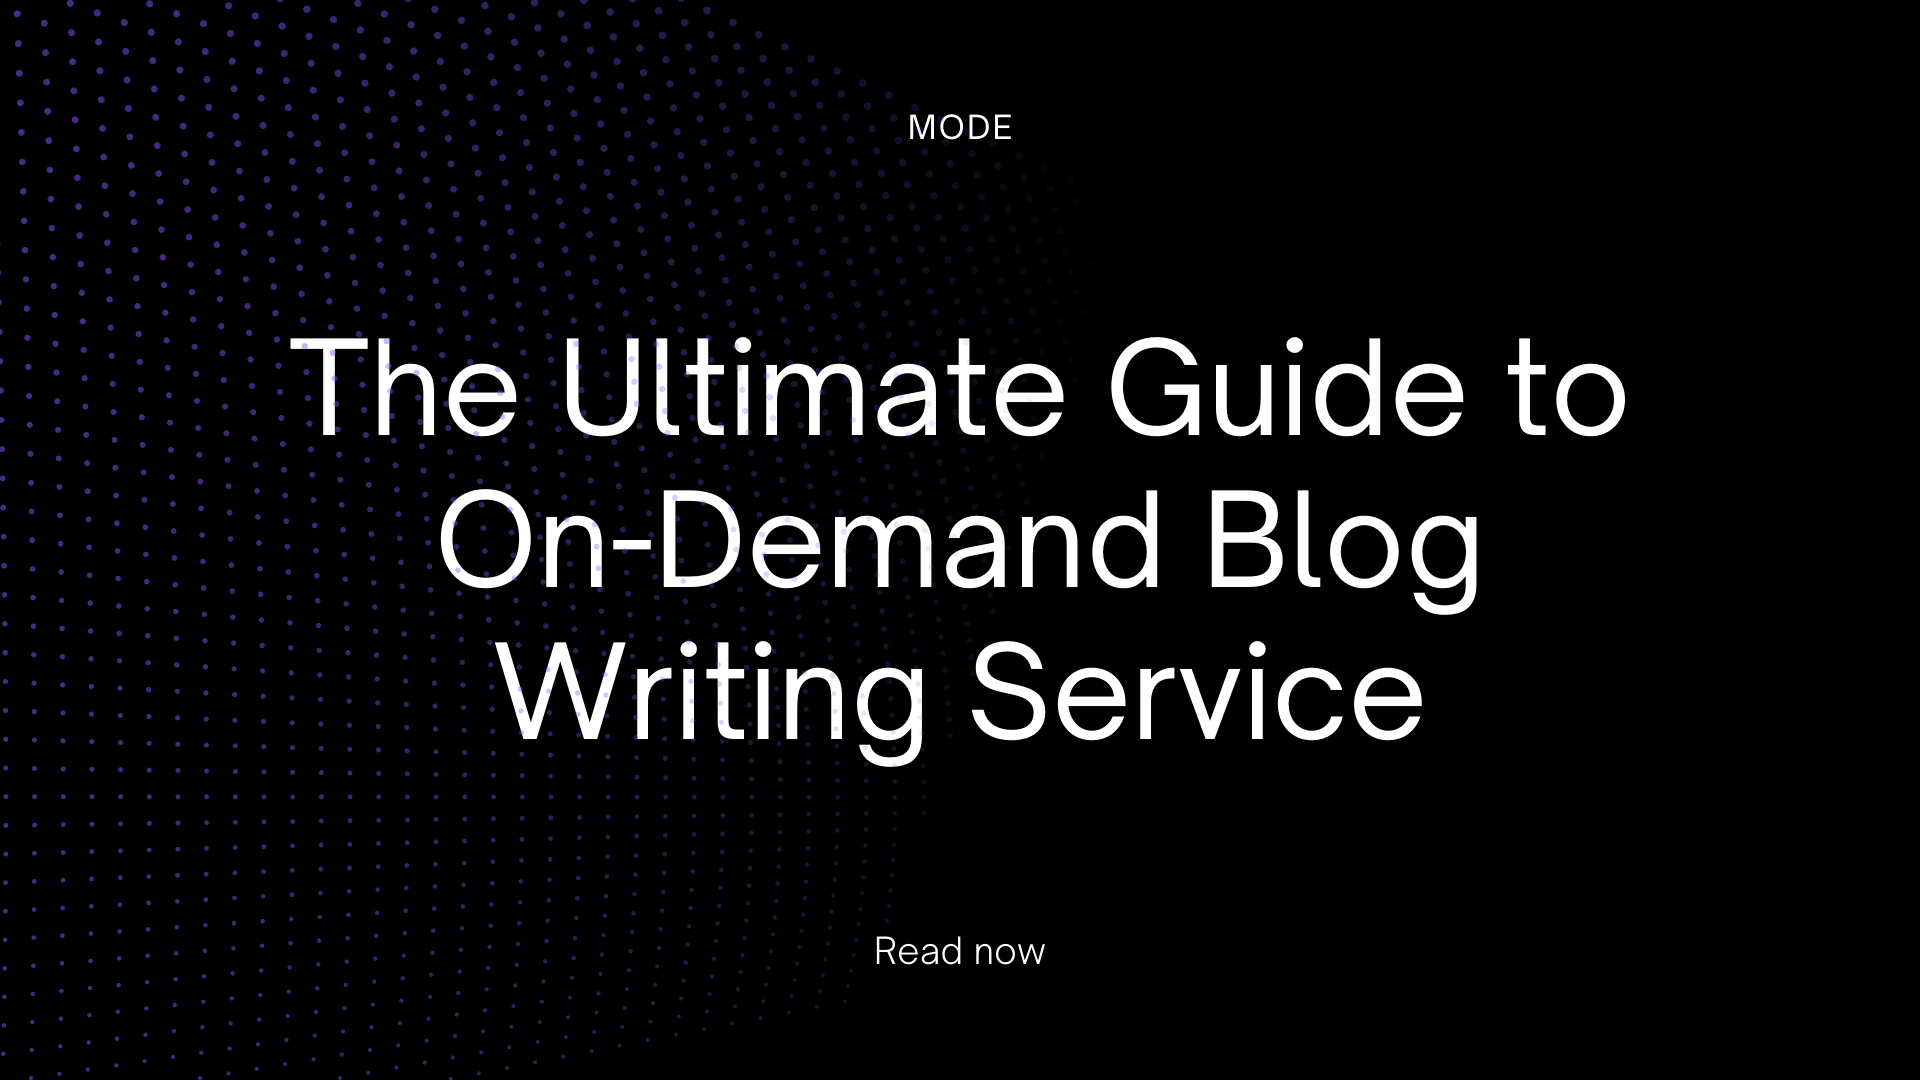 The Ultimate Guide to On-Demand Blog Writing Service